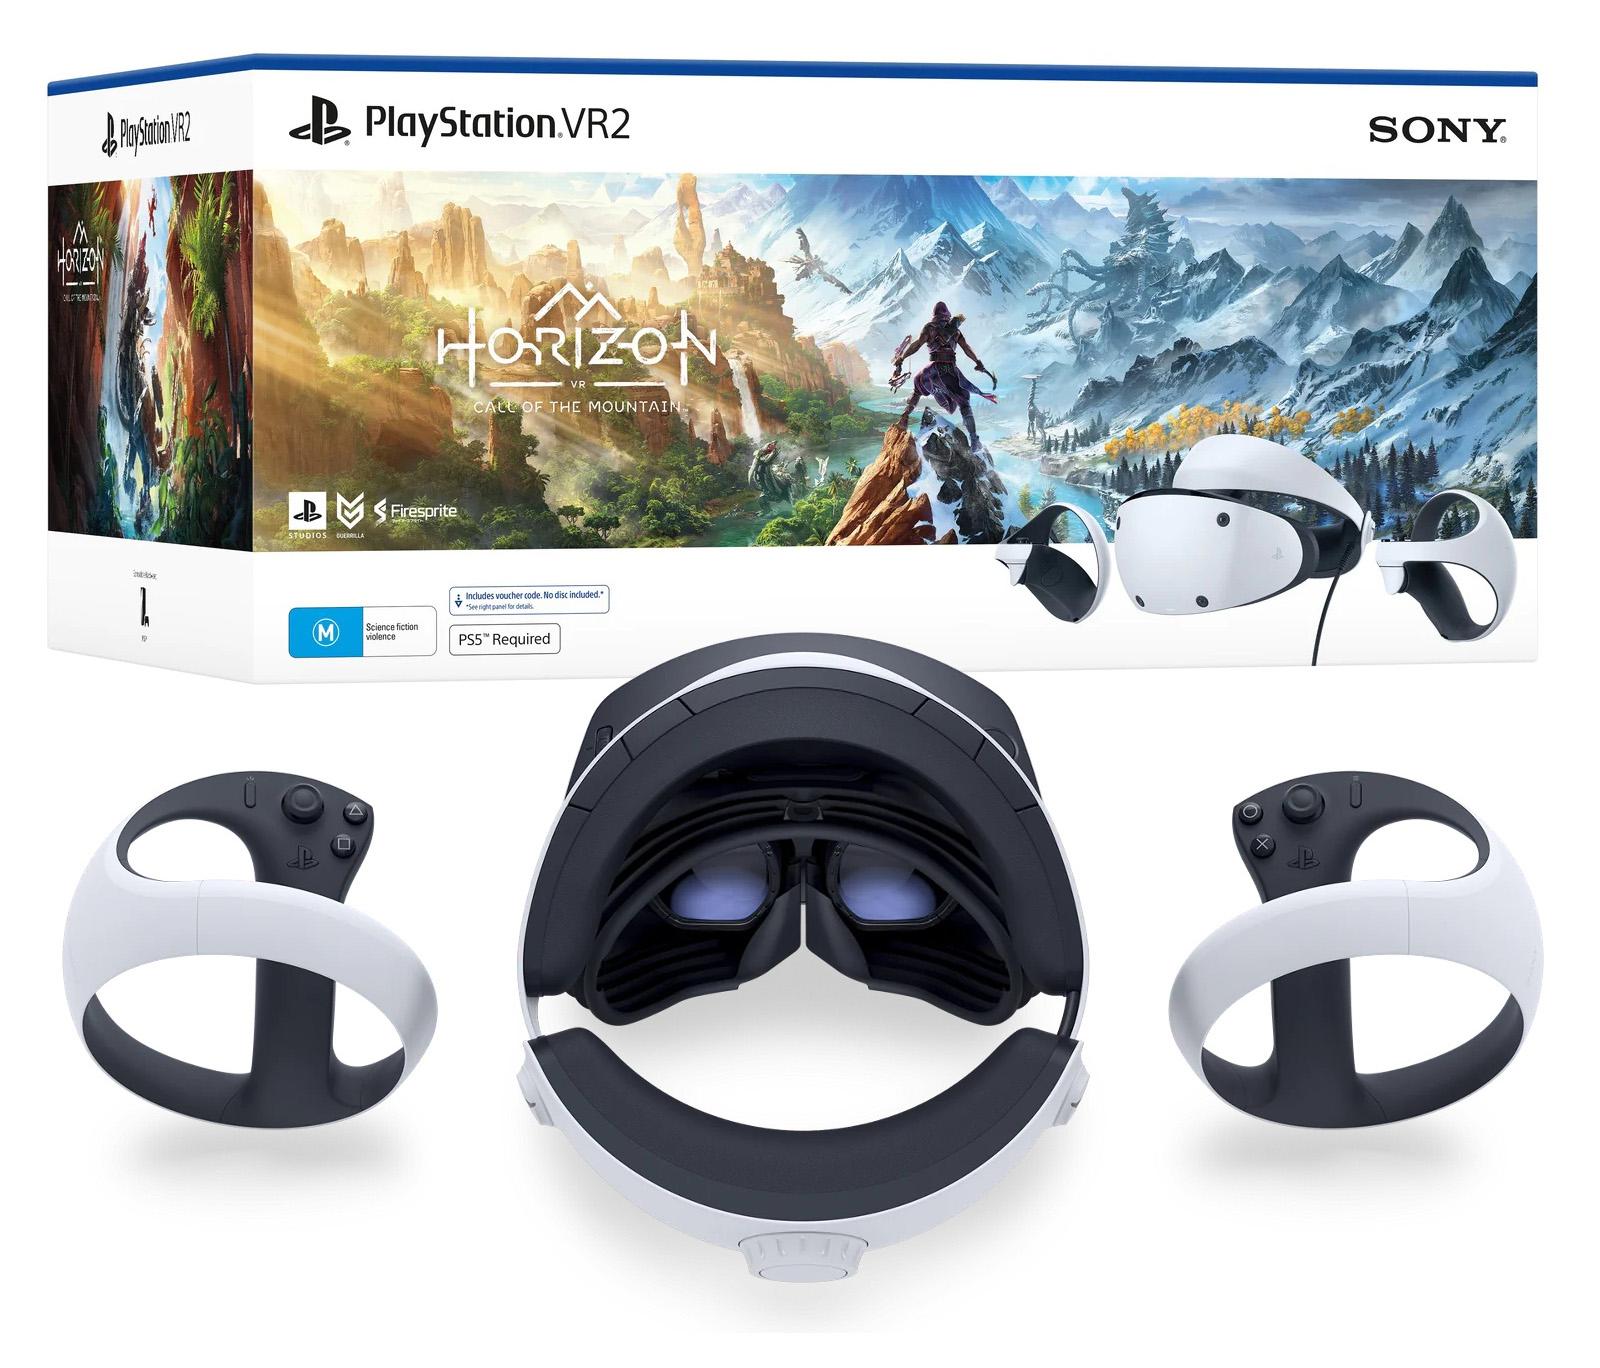 Sony PS5 PlayStation VR2 Horizon Call of the Mountain Bundle for $499.99 Shipped